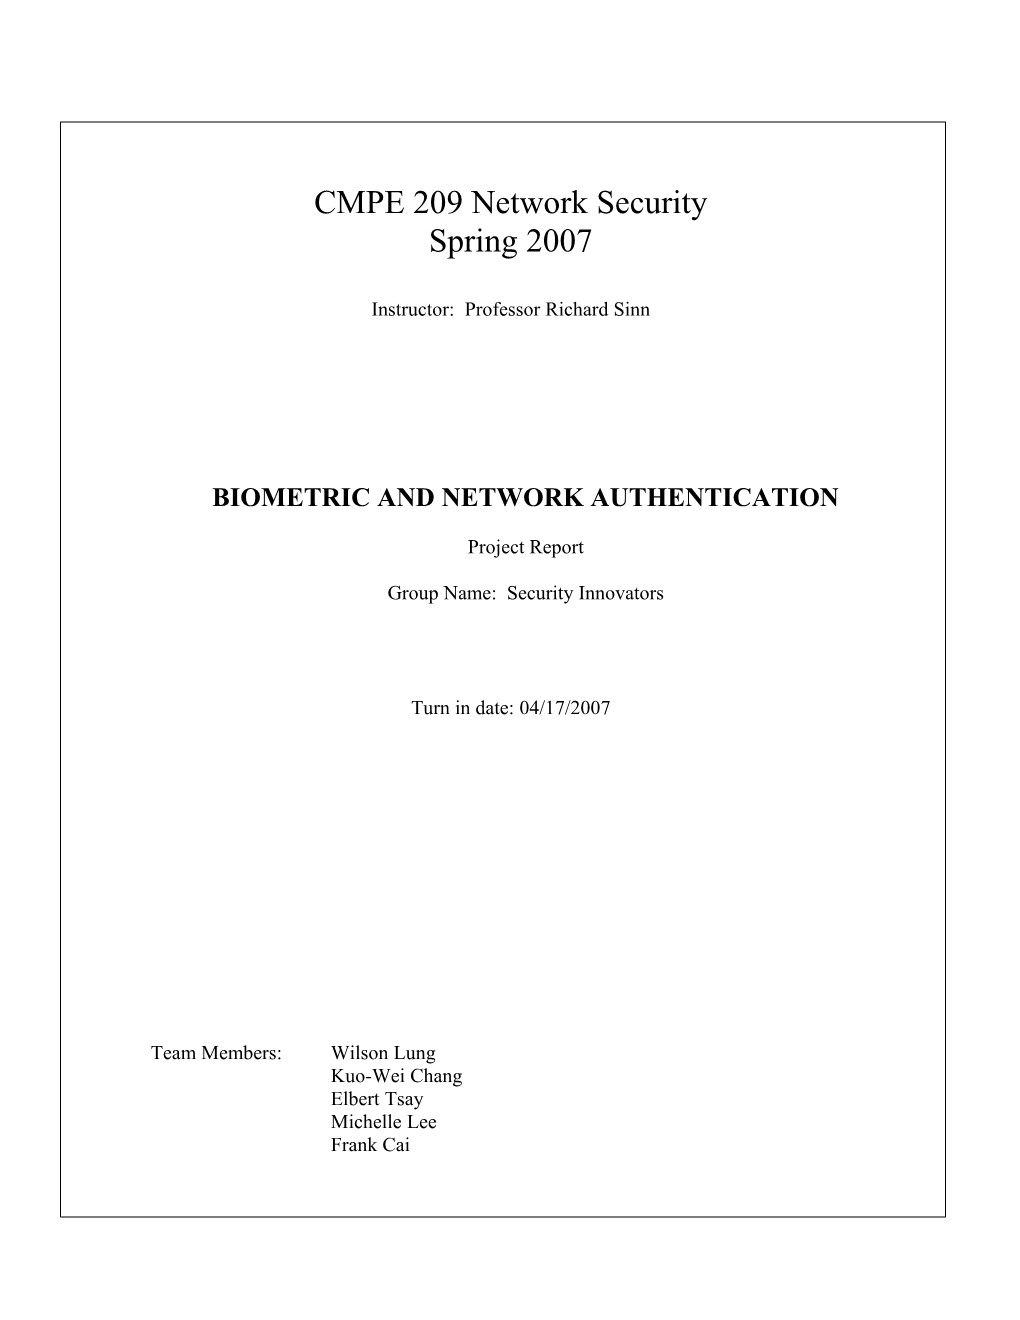 Biometric and Network Authentication